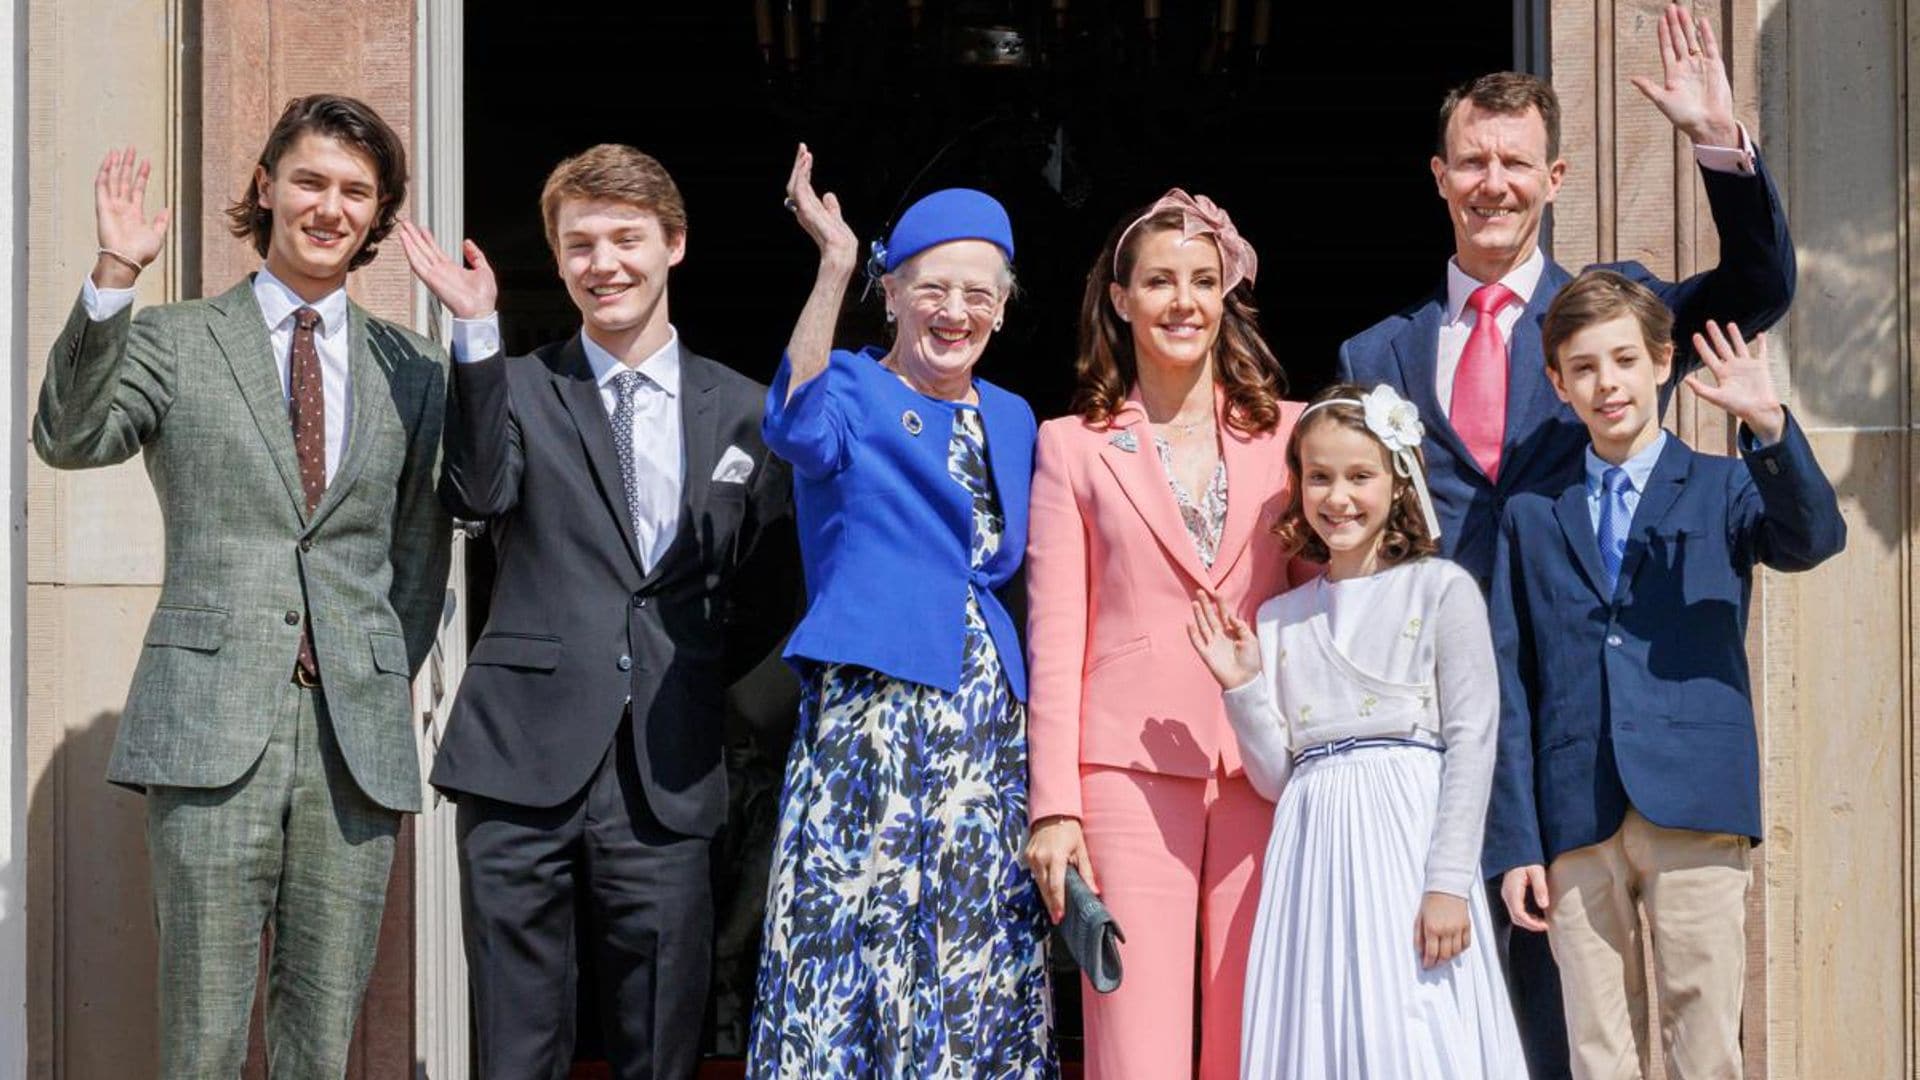 Changes on the way for one royal family in 2023